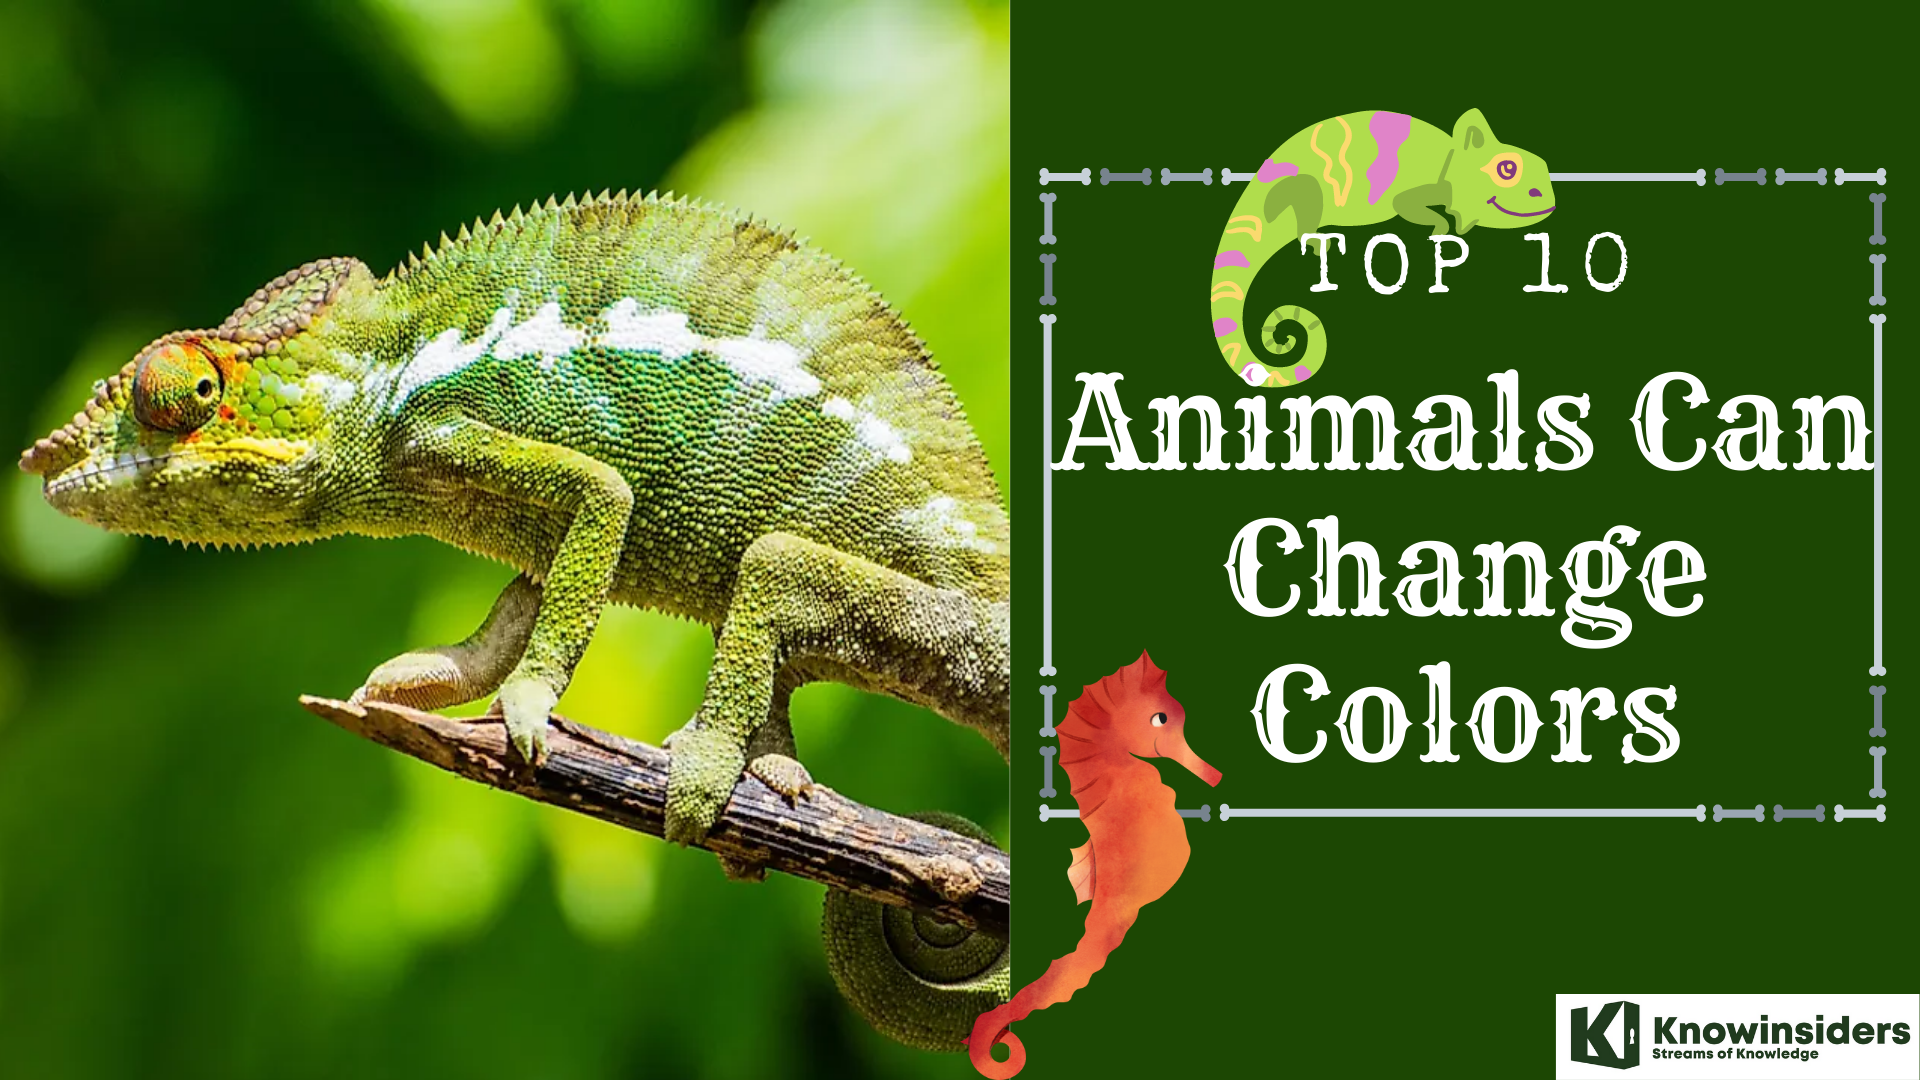 Top 10 animals that can change colors